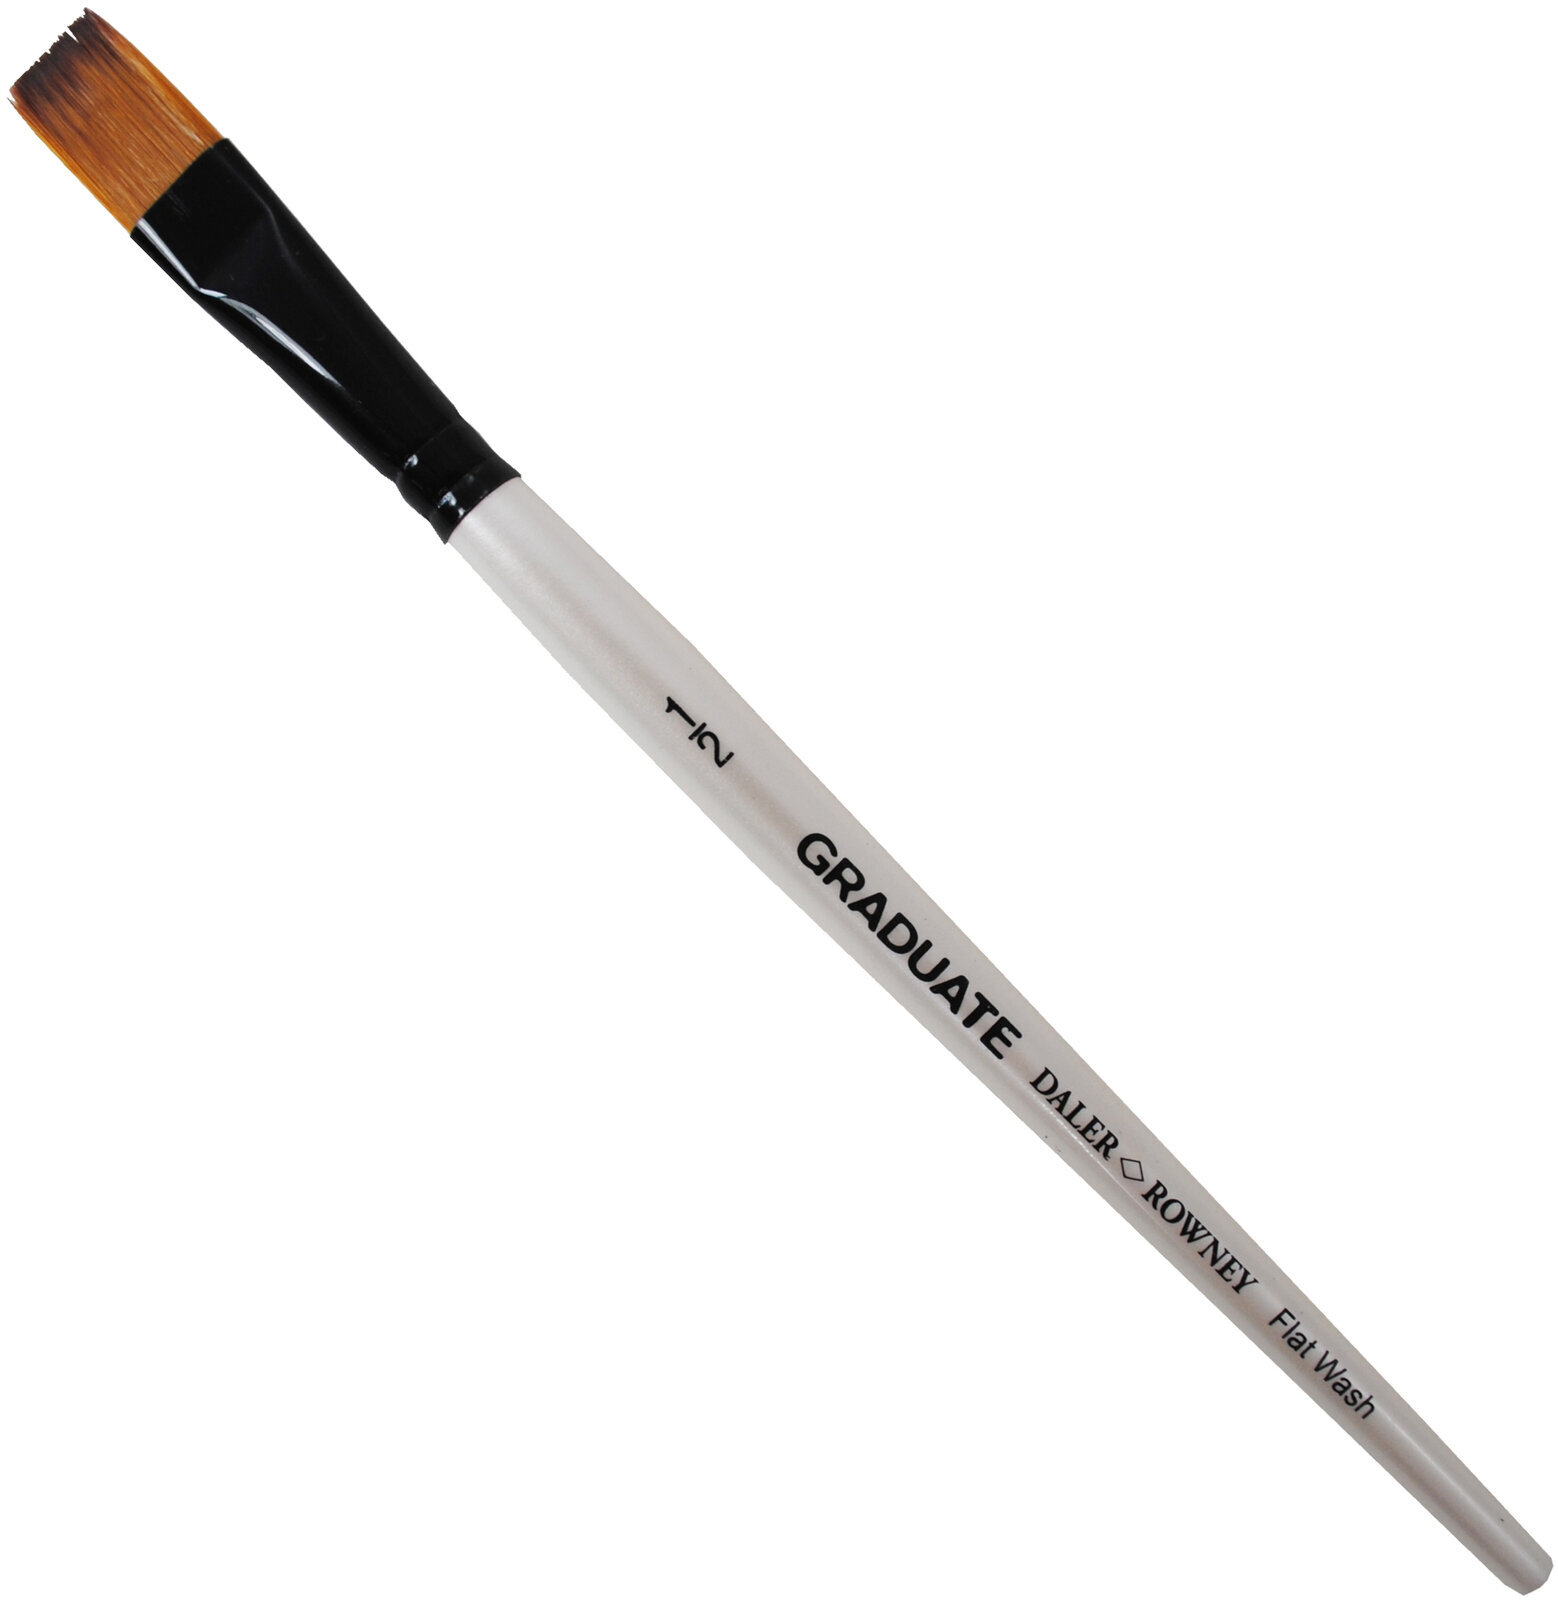 Pinsel Daler Rowney Graduate Multi-Technique Brush Synthetic Flachpinsel 1/2 1 Stck